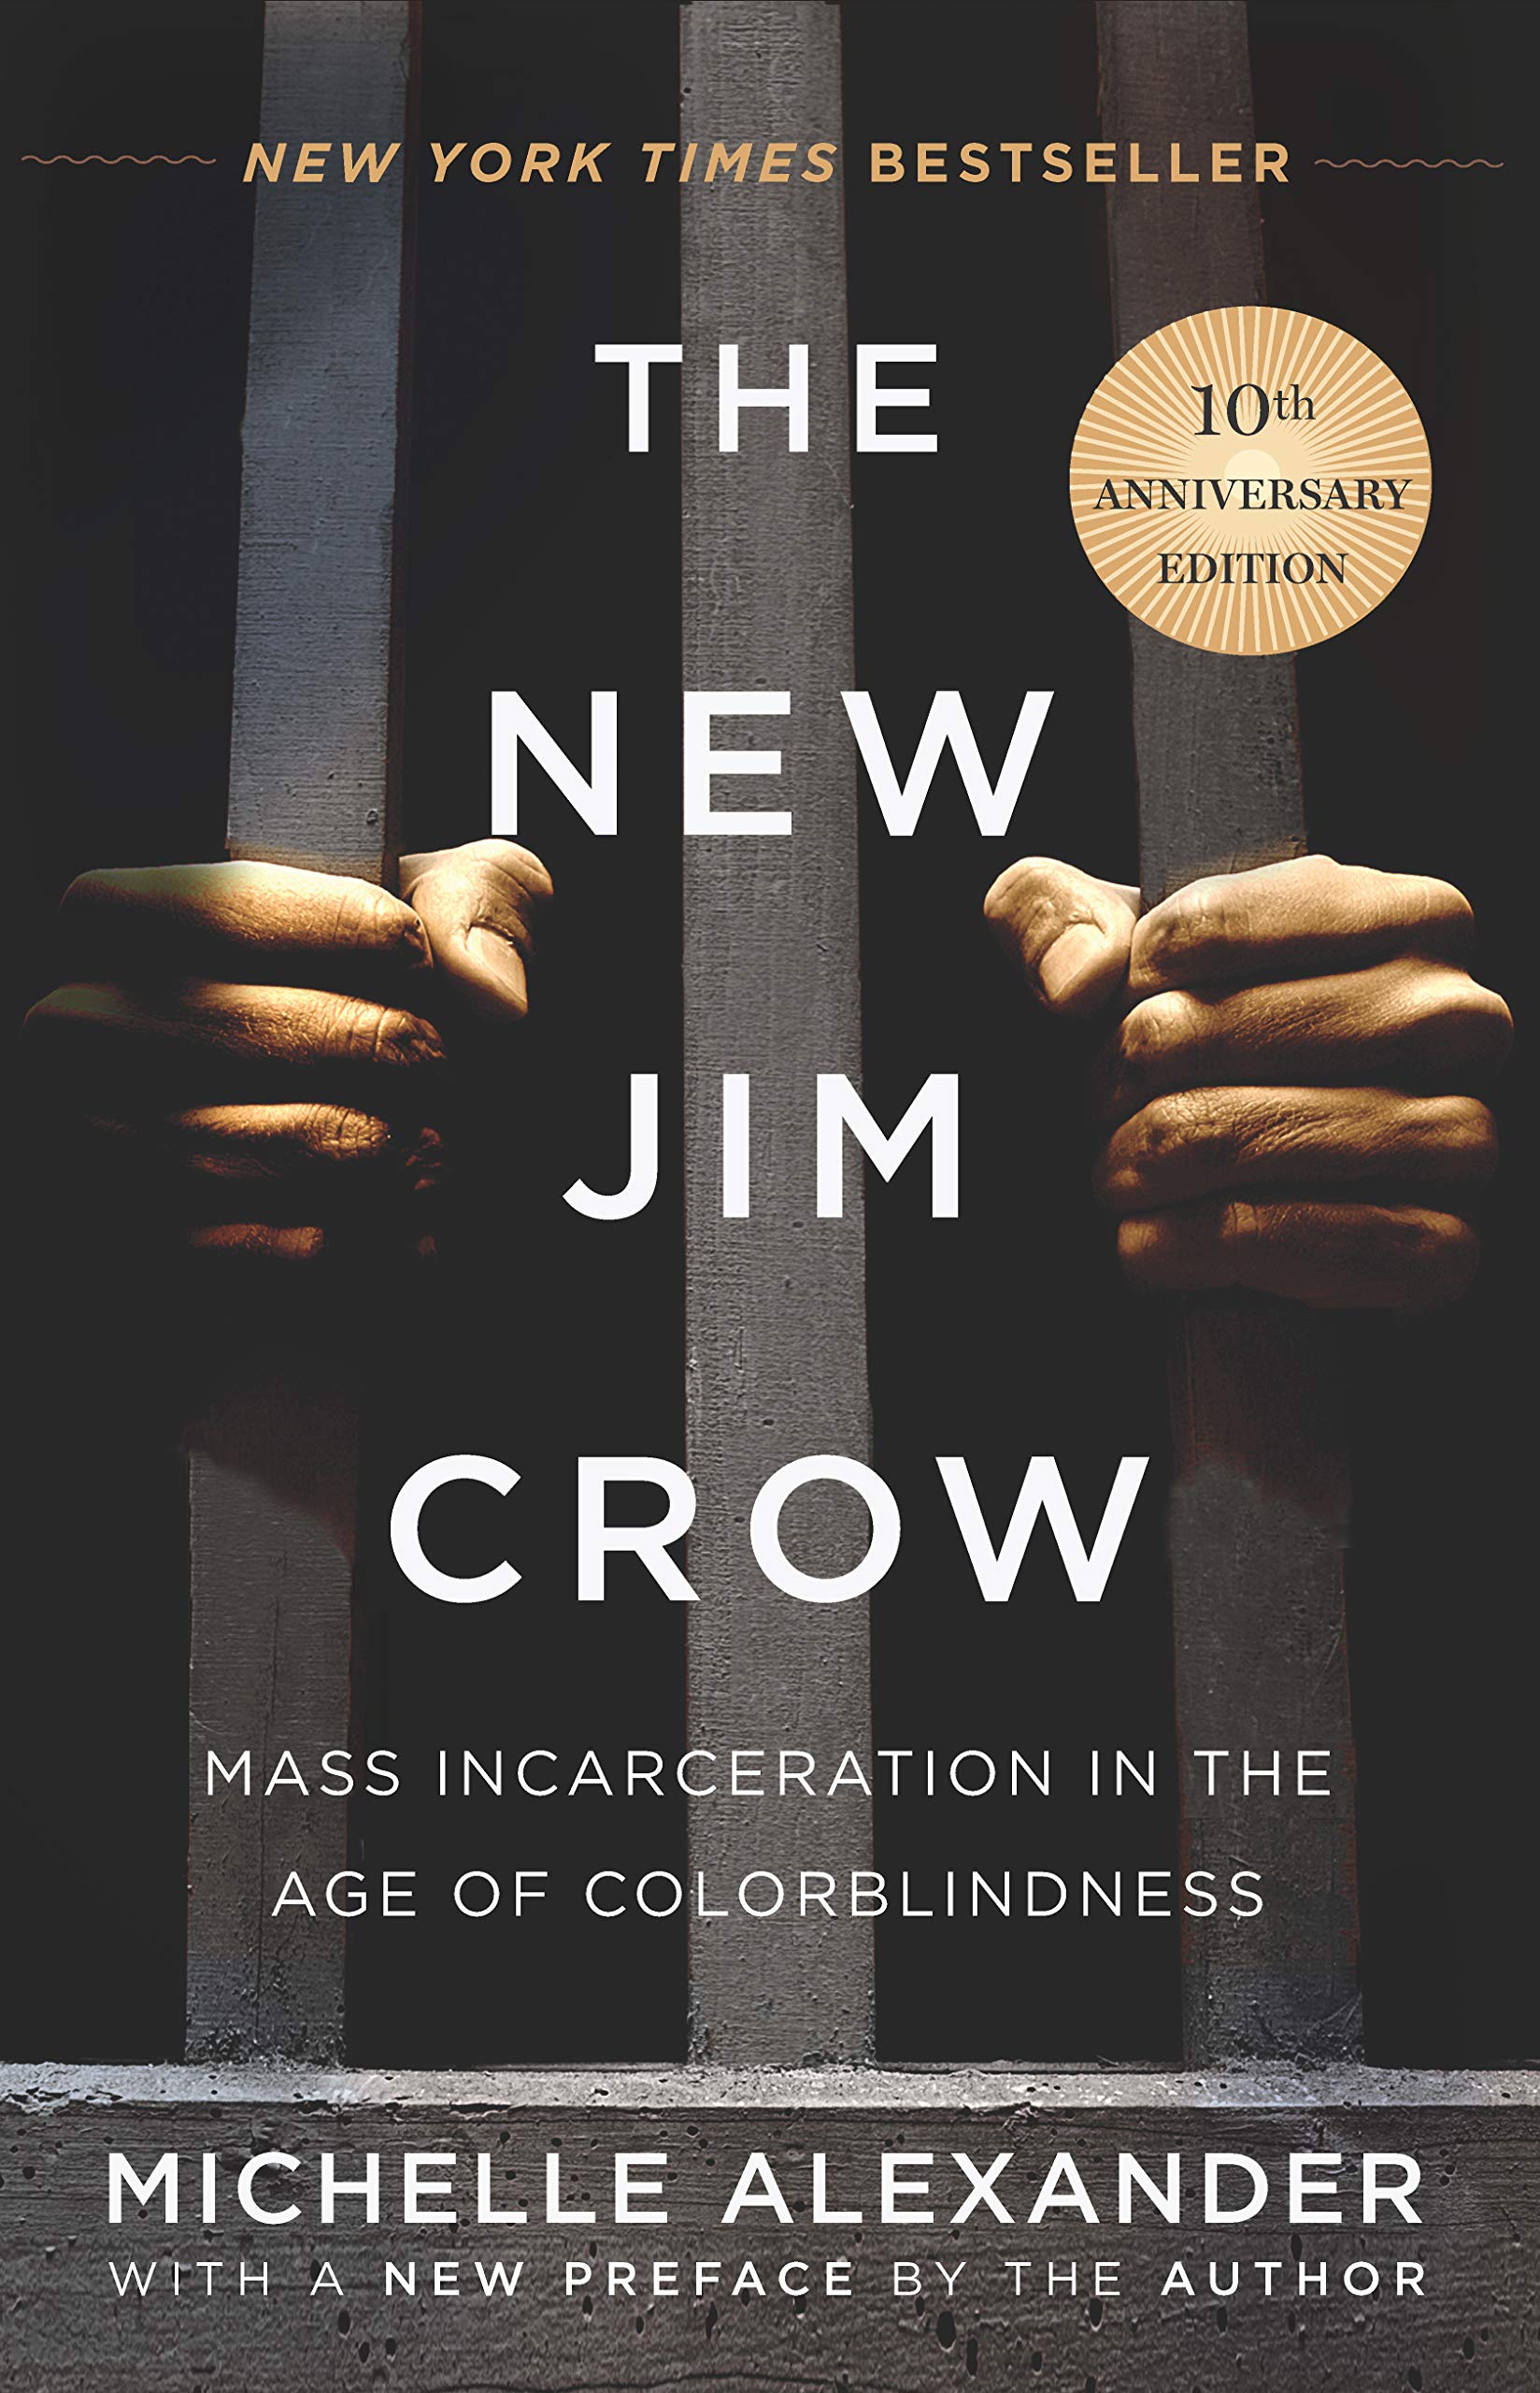 The New Jim Crow- Mass Incarceration in the Age of Colorblindness